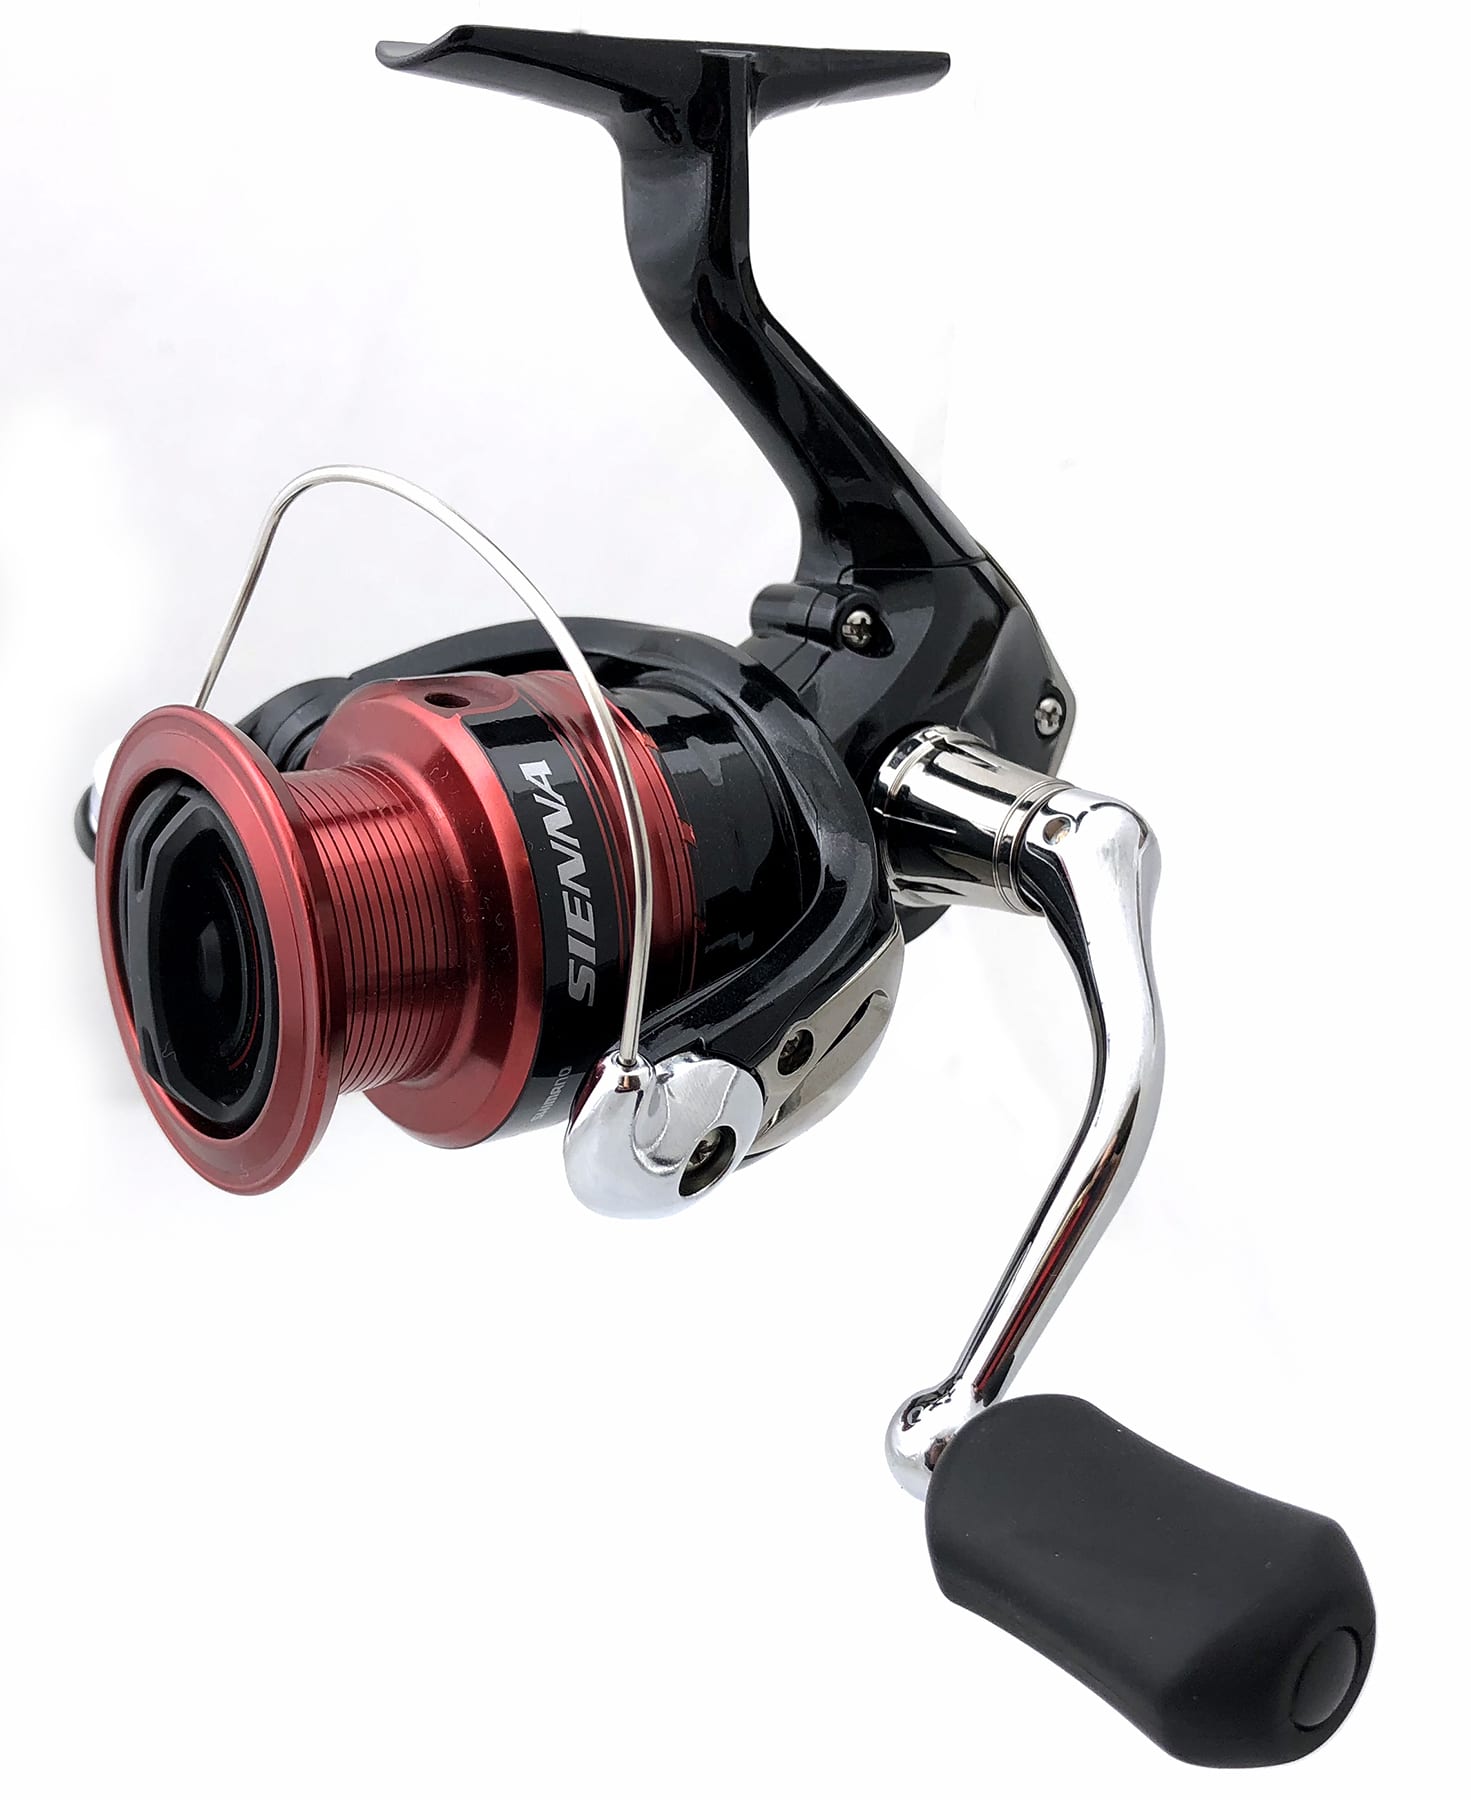 Shimano Sienna Spinning Reel-Front Drag - The Bent Rod